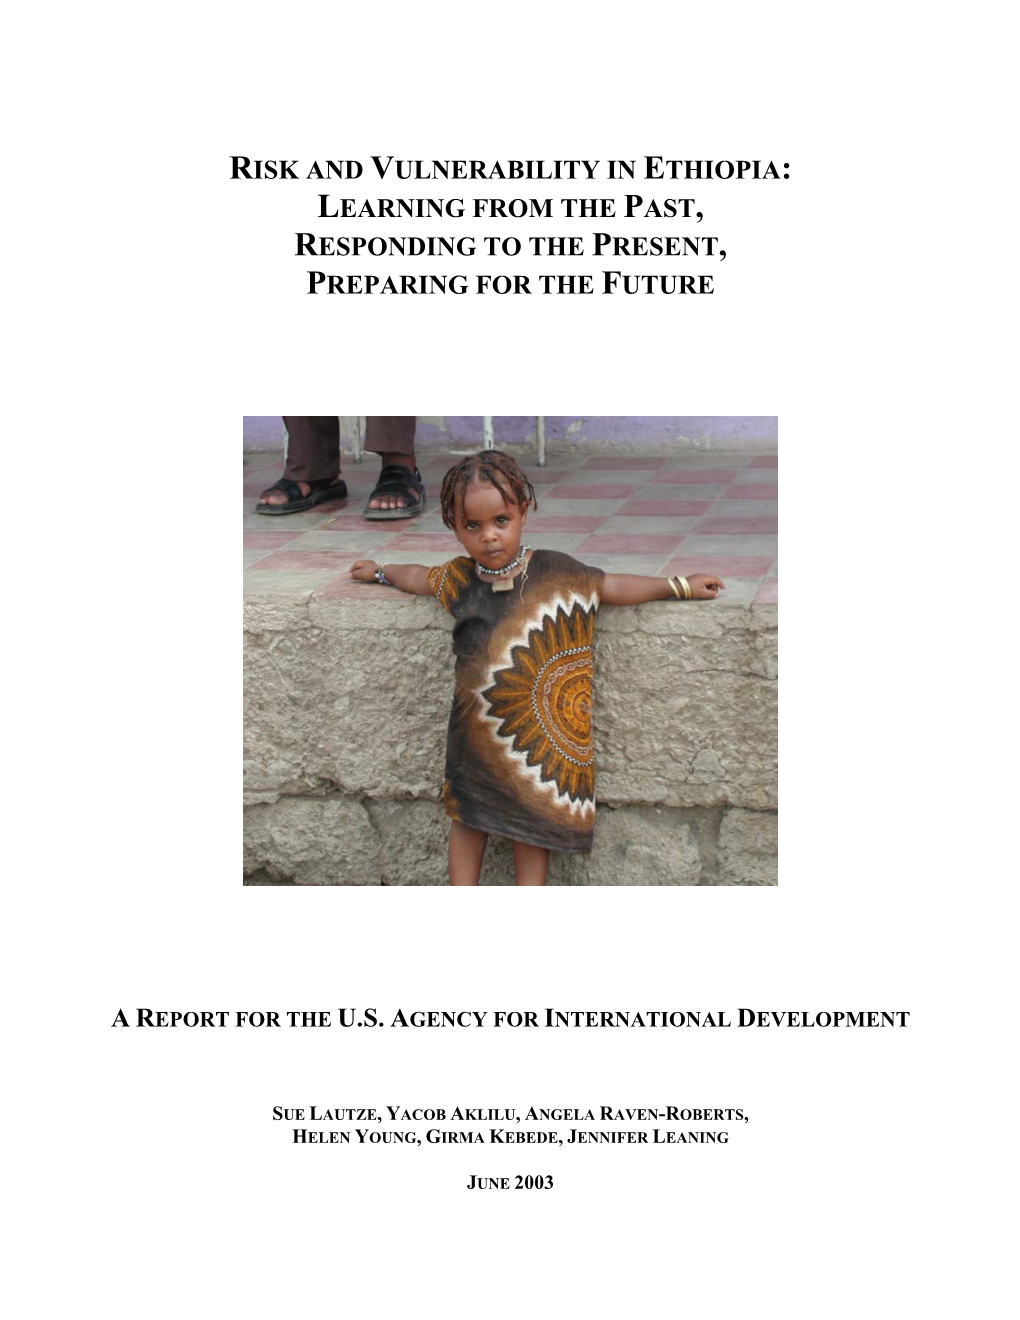 Risk and Vulnerability in Ethiopia: Learning from the Past, Responding to the Present, Preparing for the Future